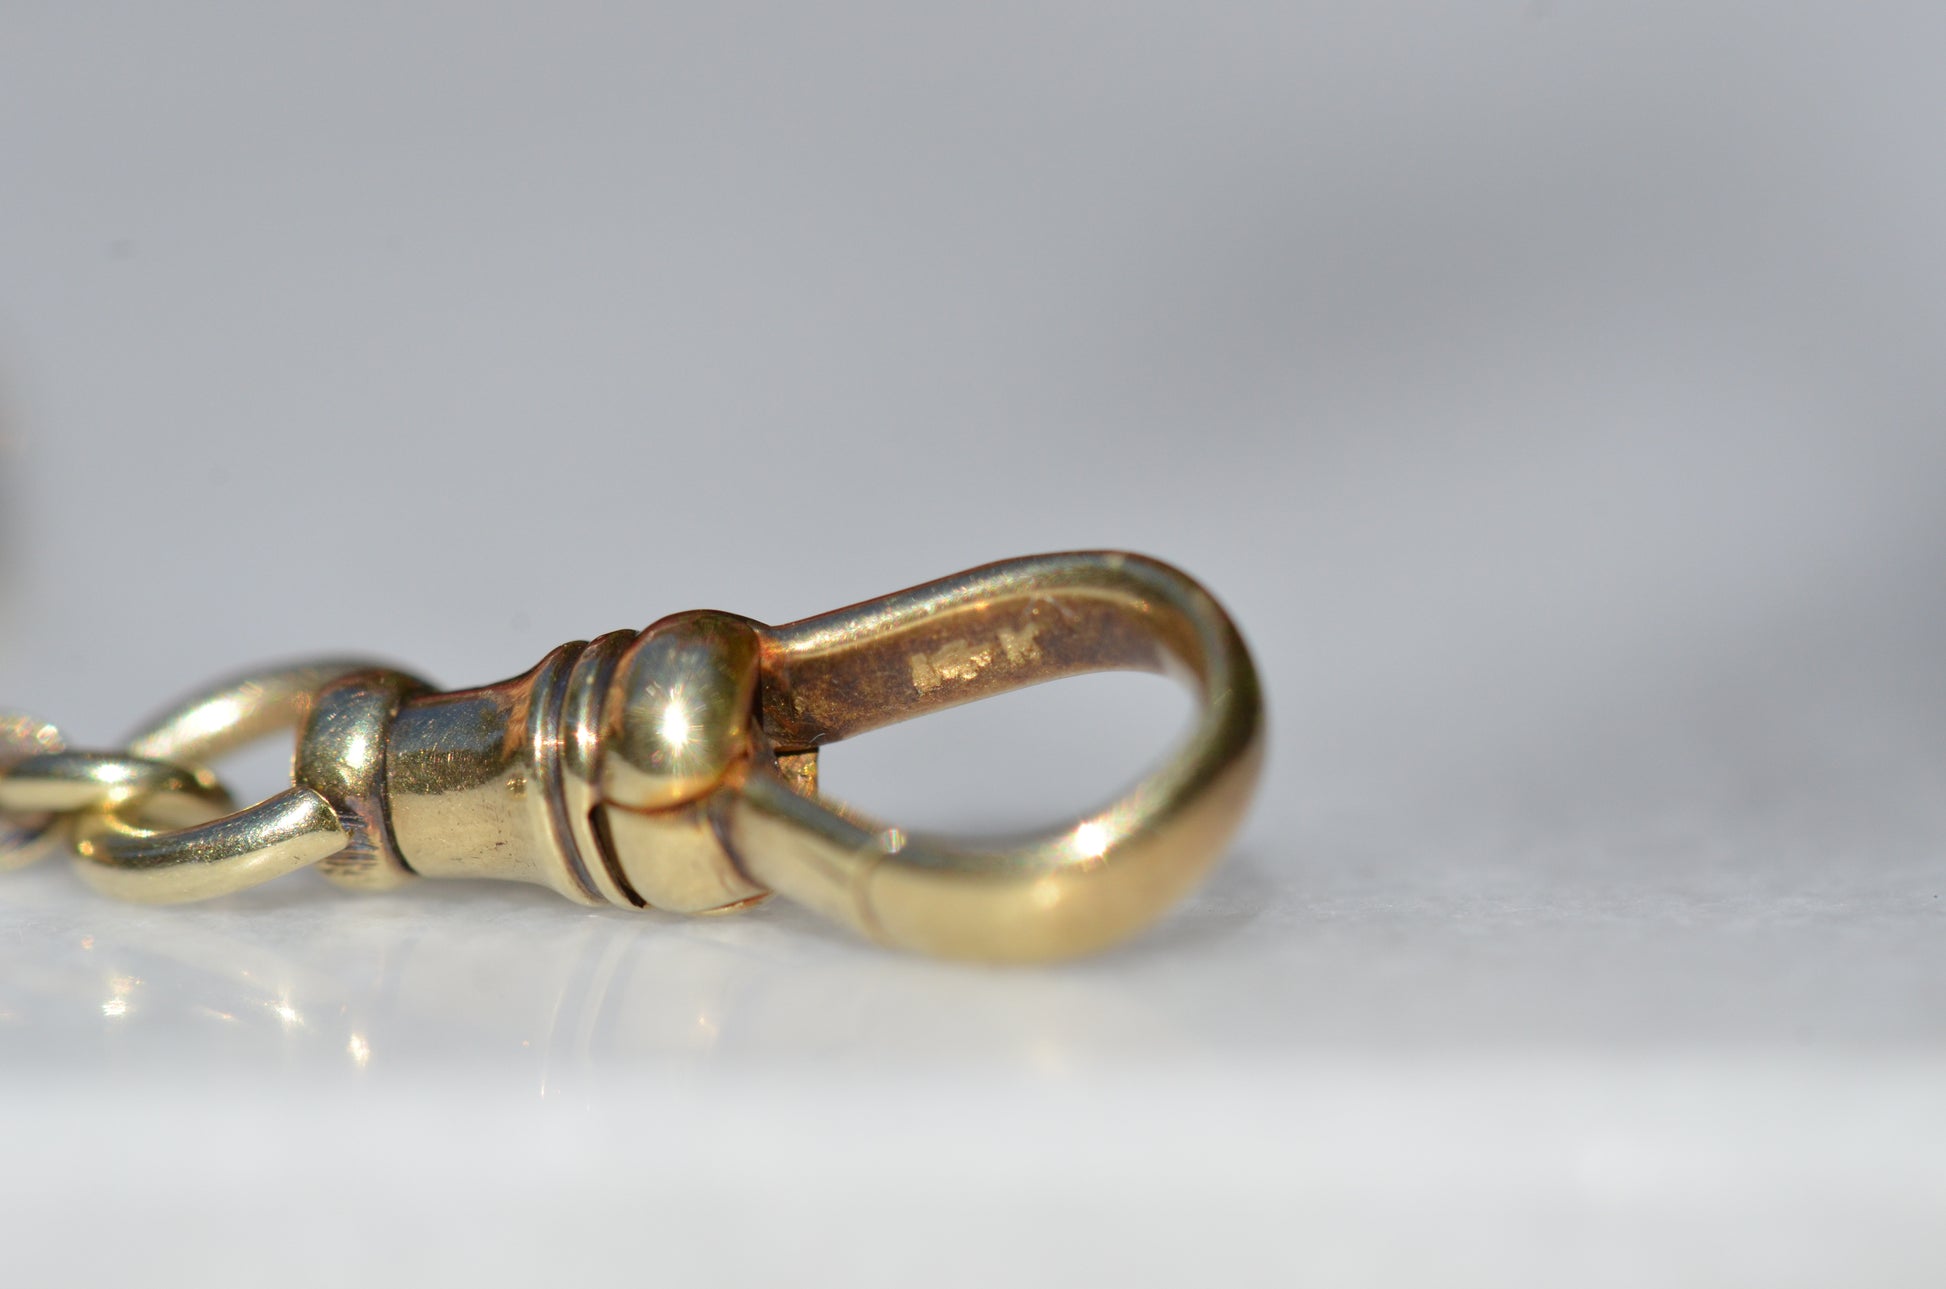 A closely cropped photo of the gold purity stamp on the inside of the clasp.